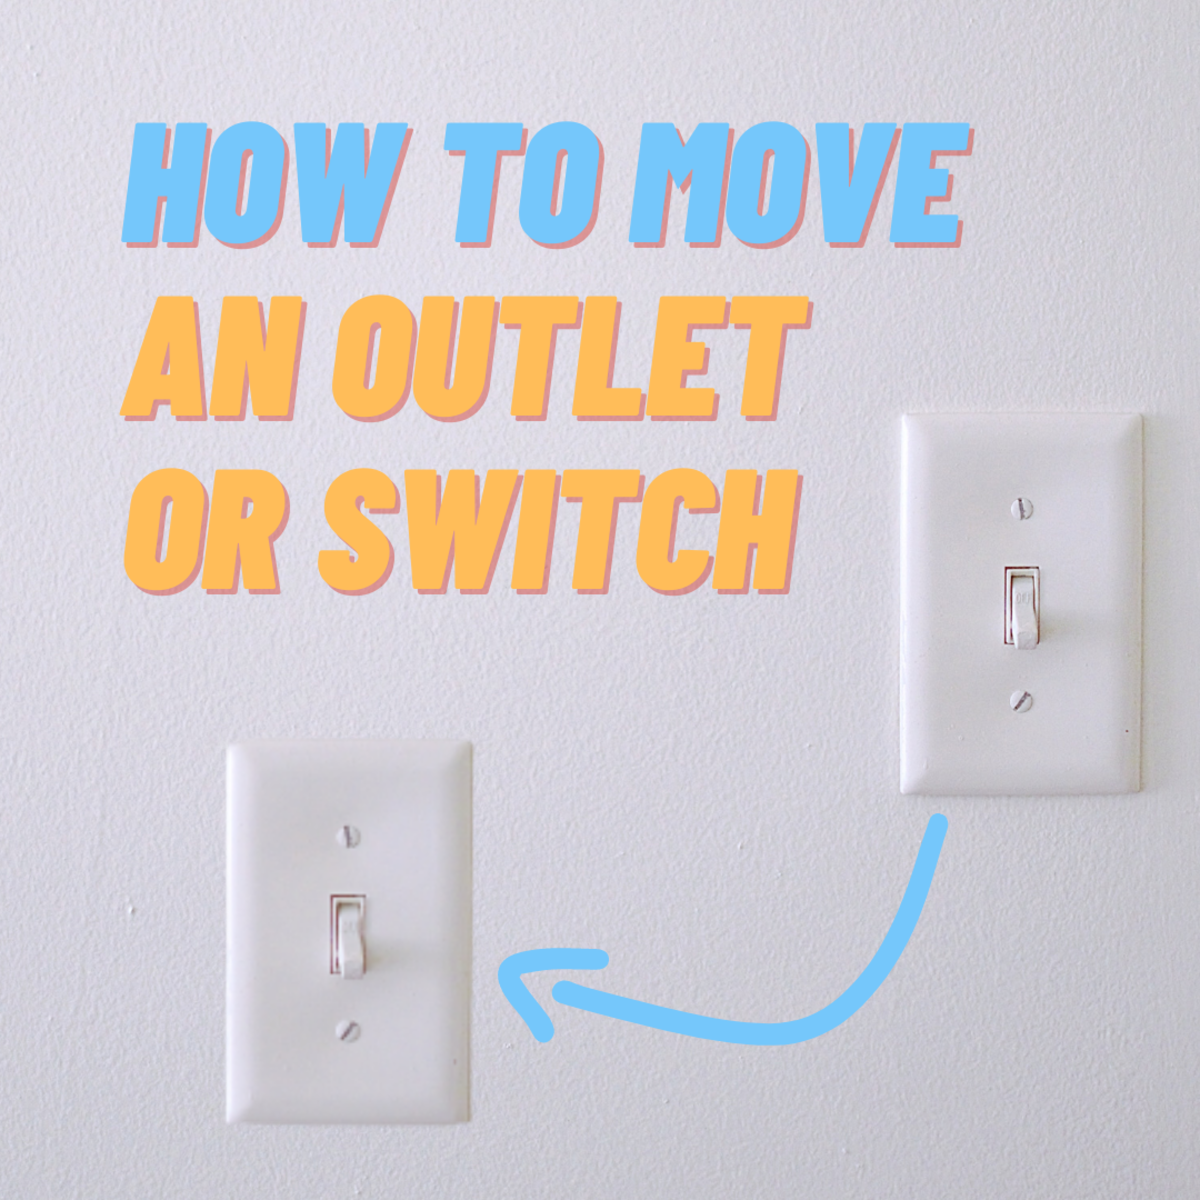 Without switch. Light Switch UHD.